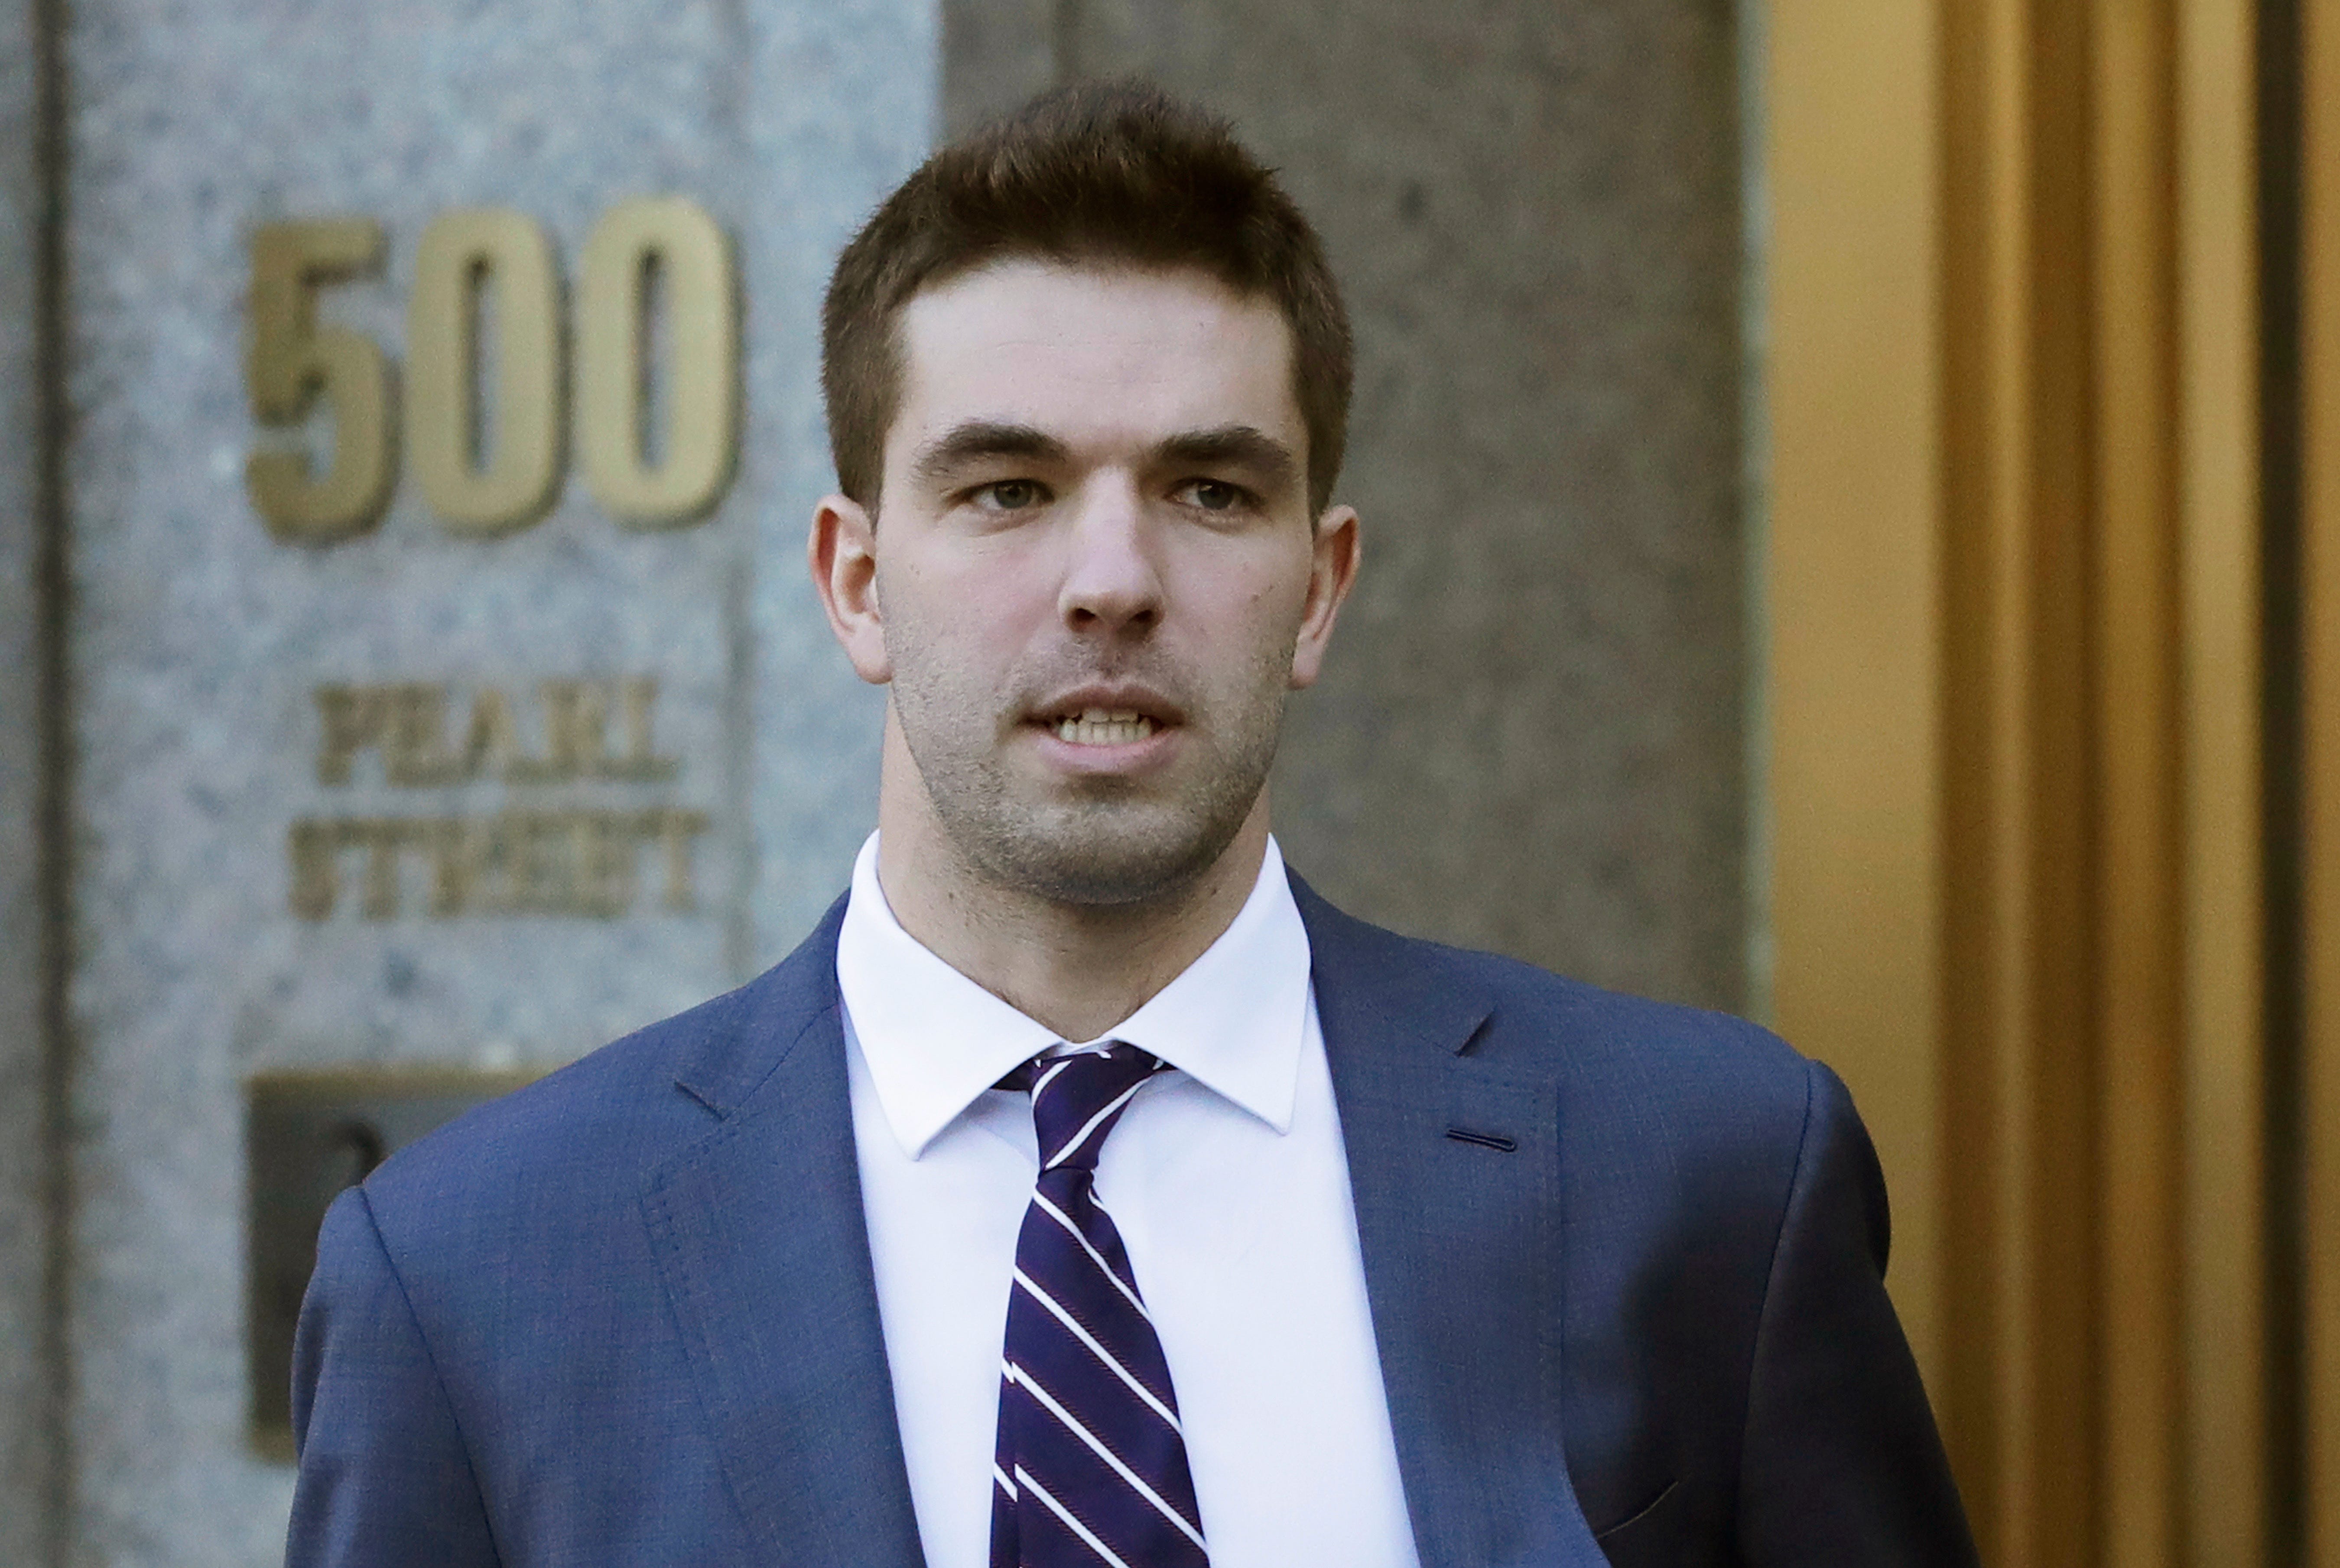 Fyre Festival 6 years in prison for failed music bash